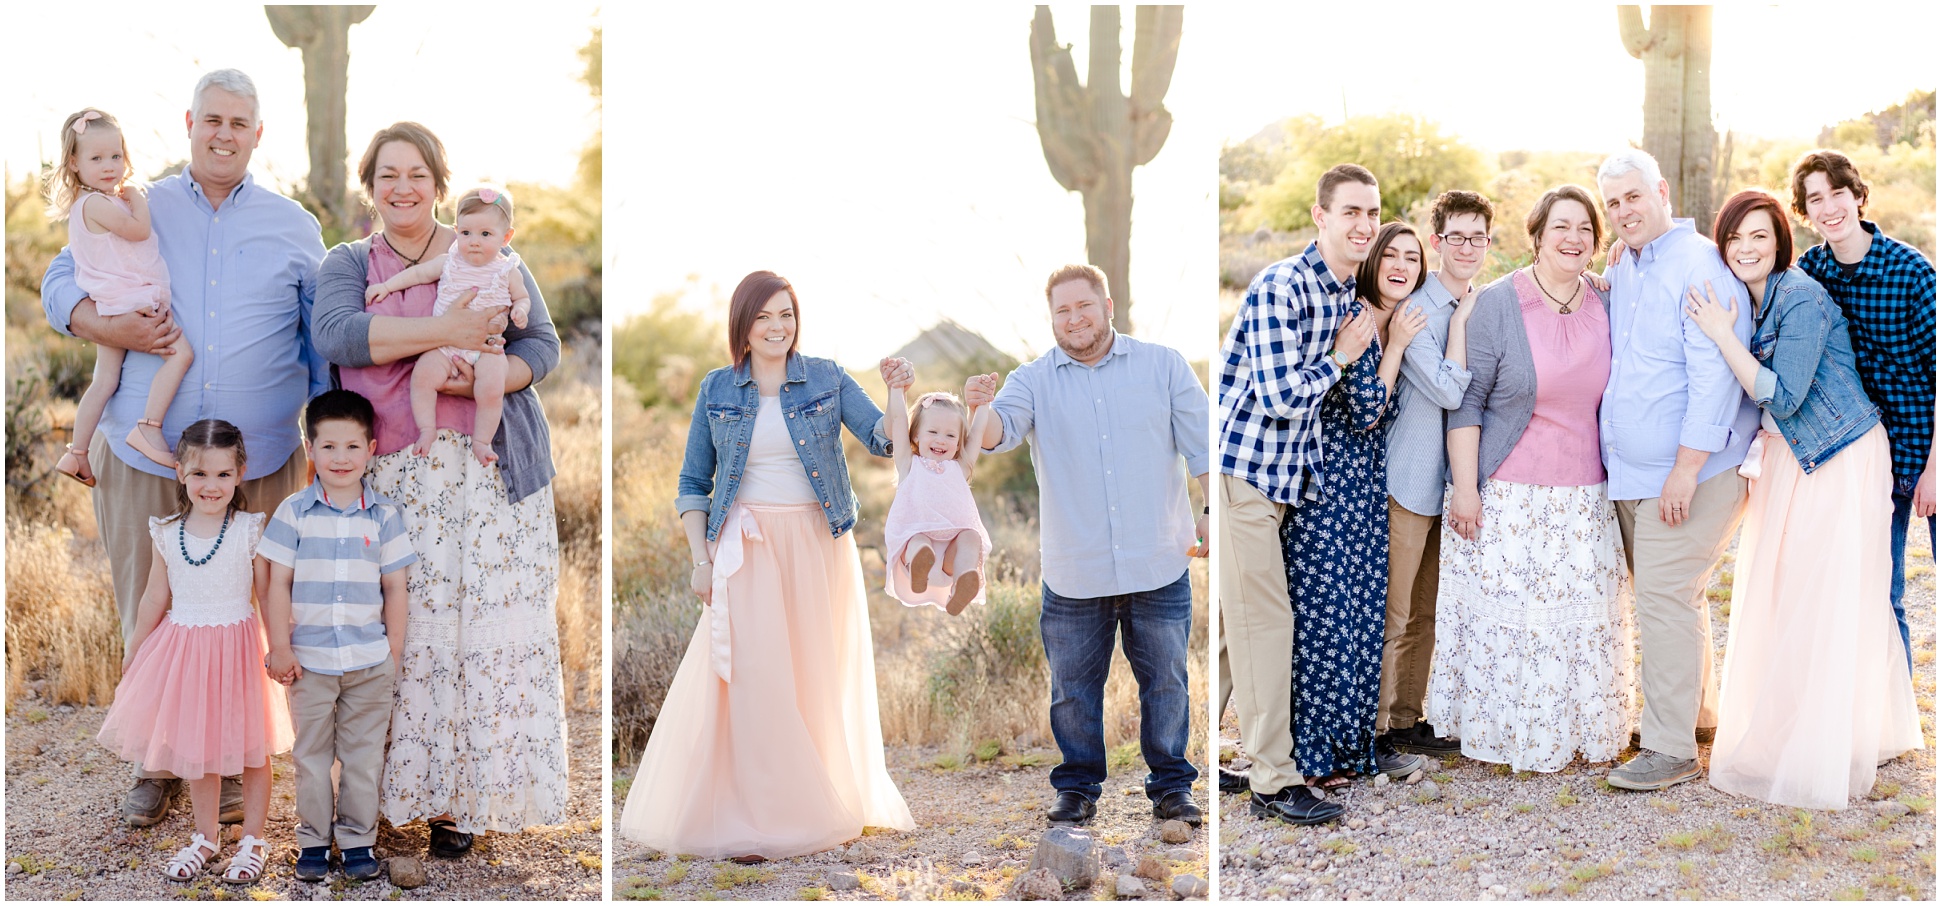 Three Images from the Hicks, Kerby, and Coombe Family Session